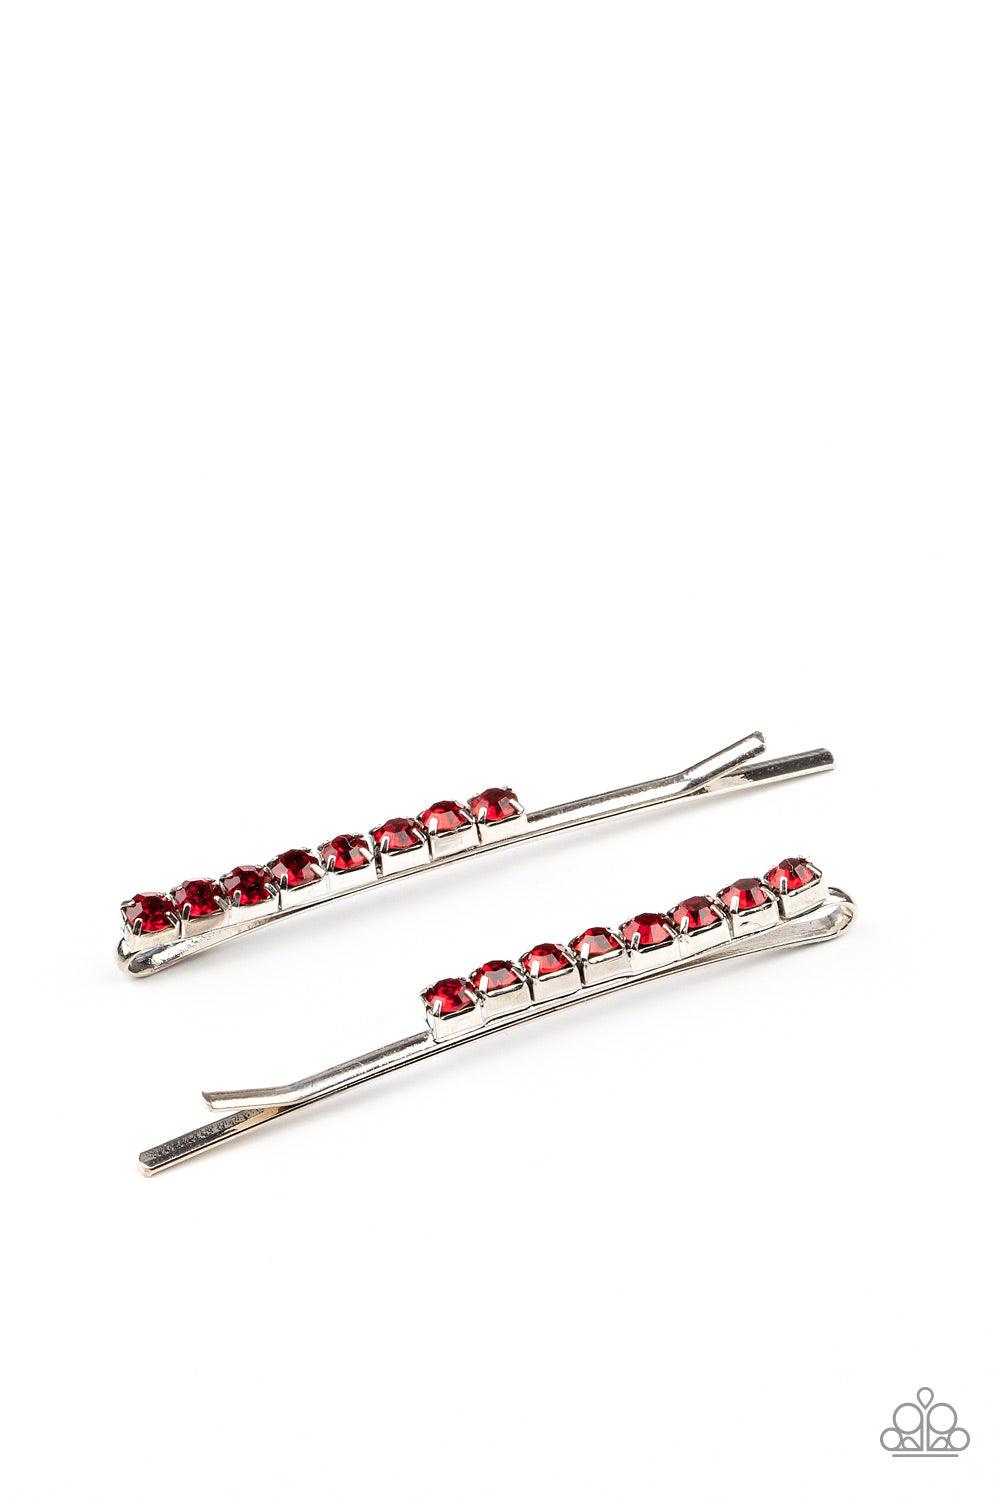 Satisfactory Sparkle Red Hair Clip - Jewelry by Bretta